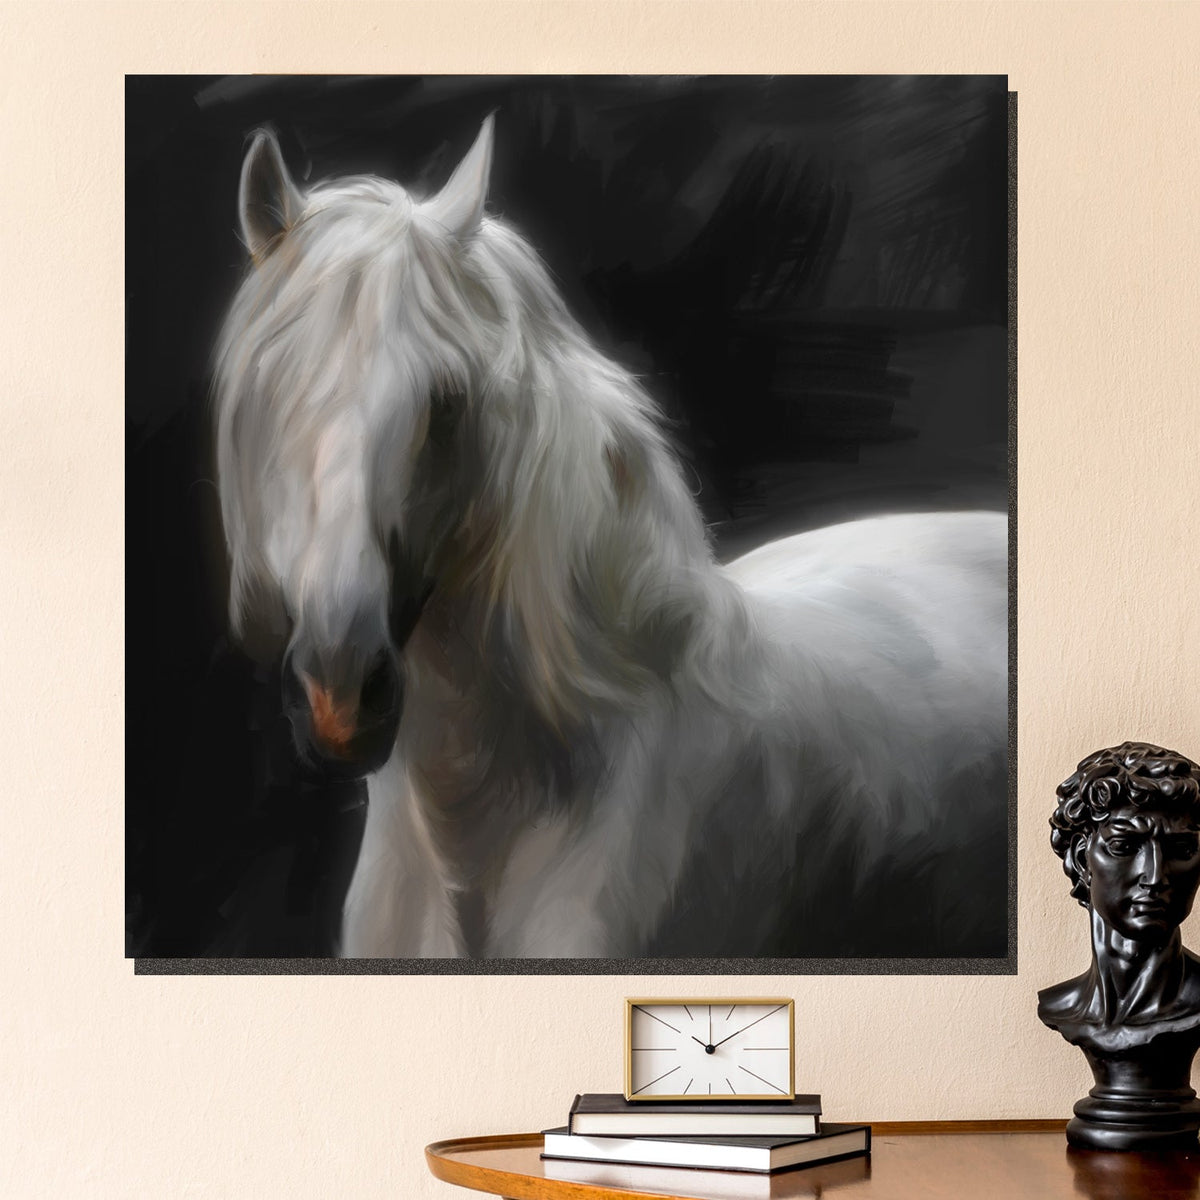 https://cdn.shopify.com/s/files/1/0387/9986/8044/products/AndalusianHorseCanvasArtprintStretched-1.jpg